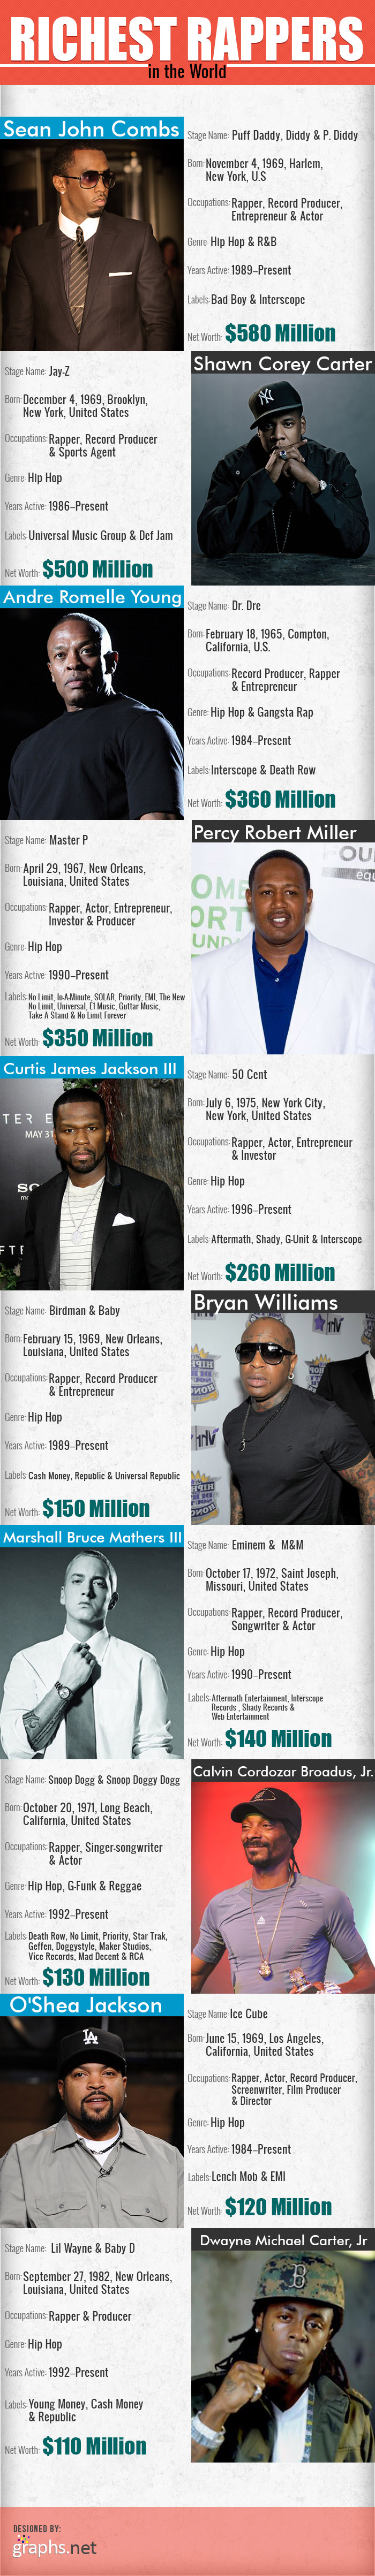 Richest Rappers in the World